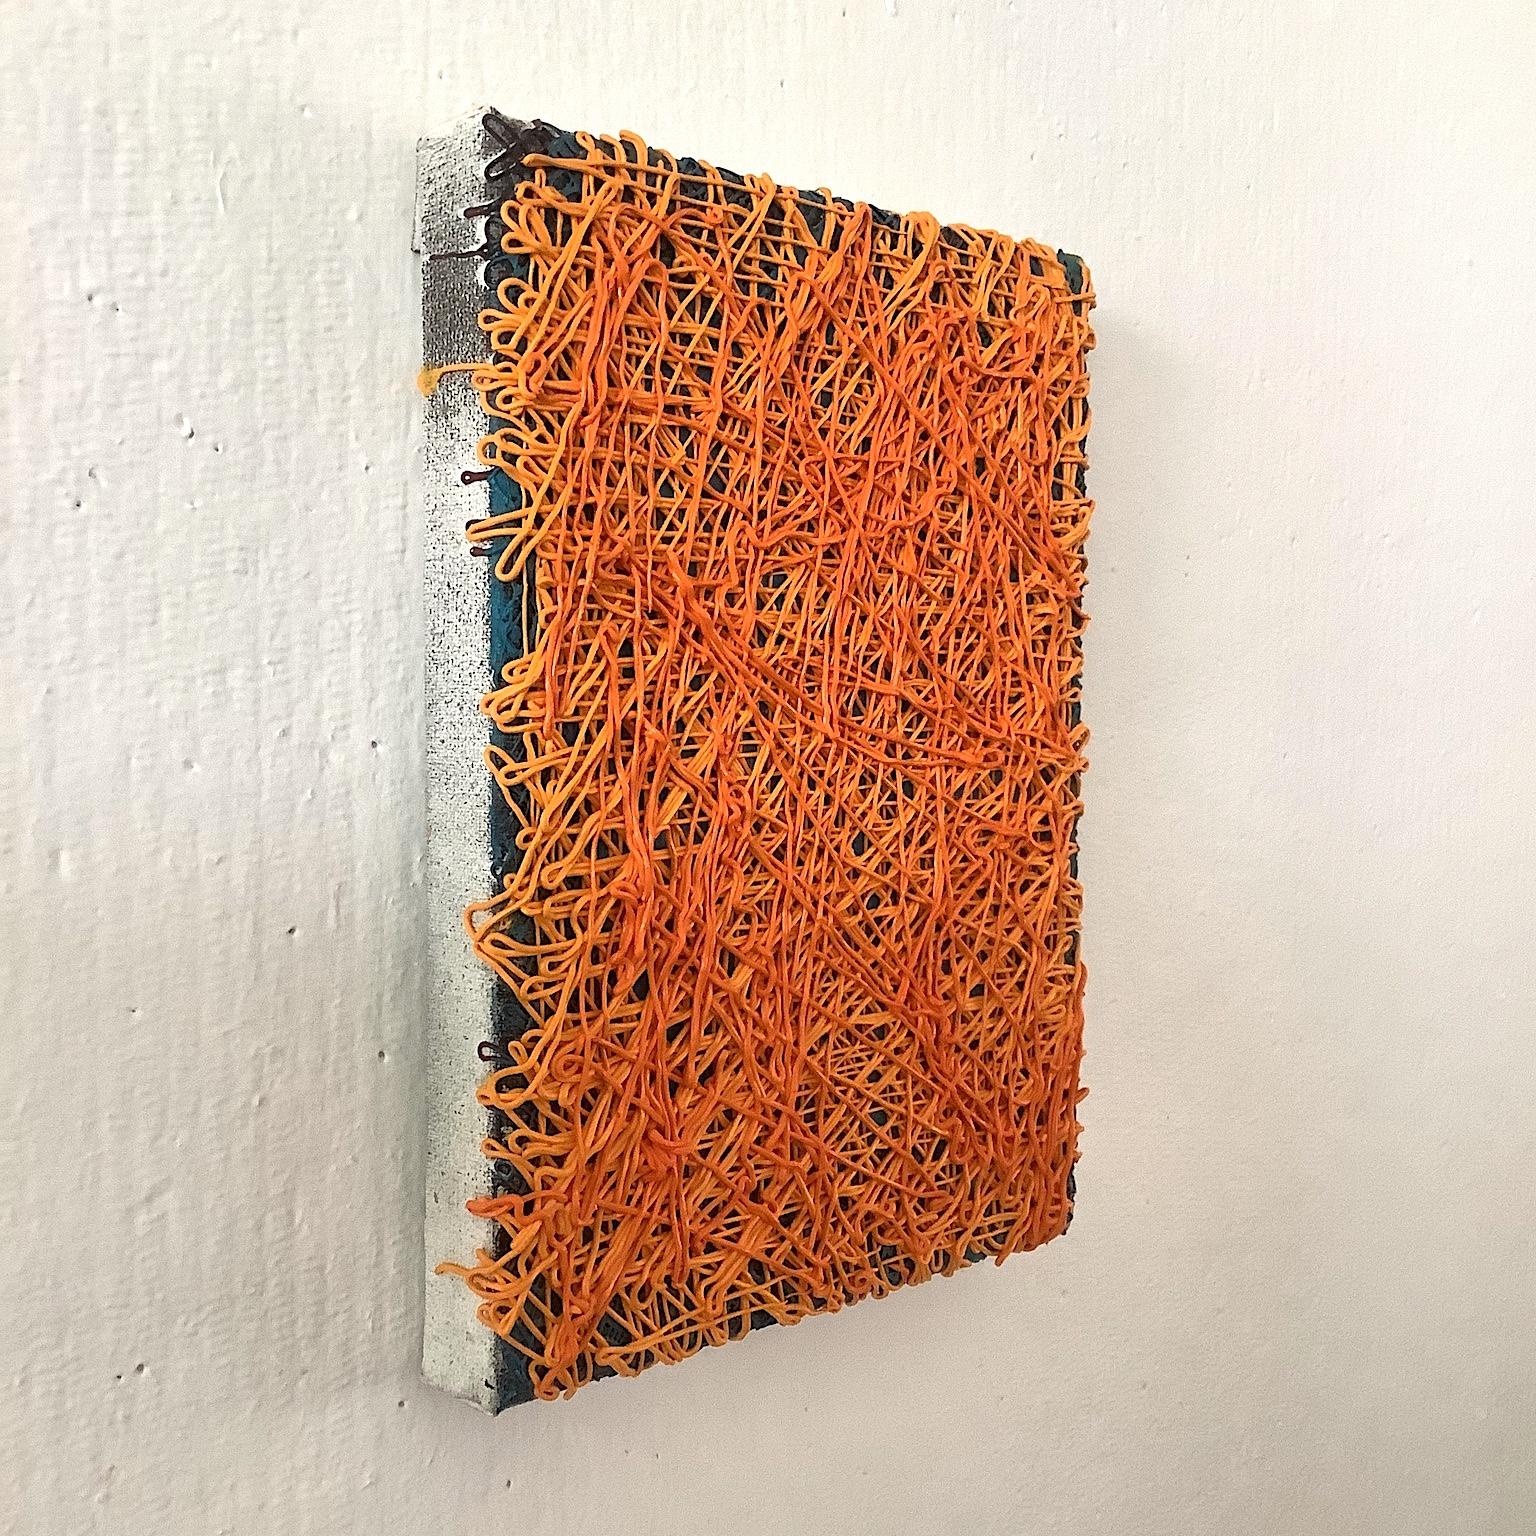 Aquil Copier, Untitled (3), Oil on Canvas, 2019 For Sale 2